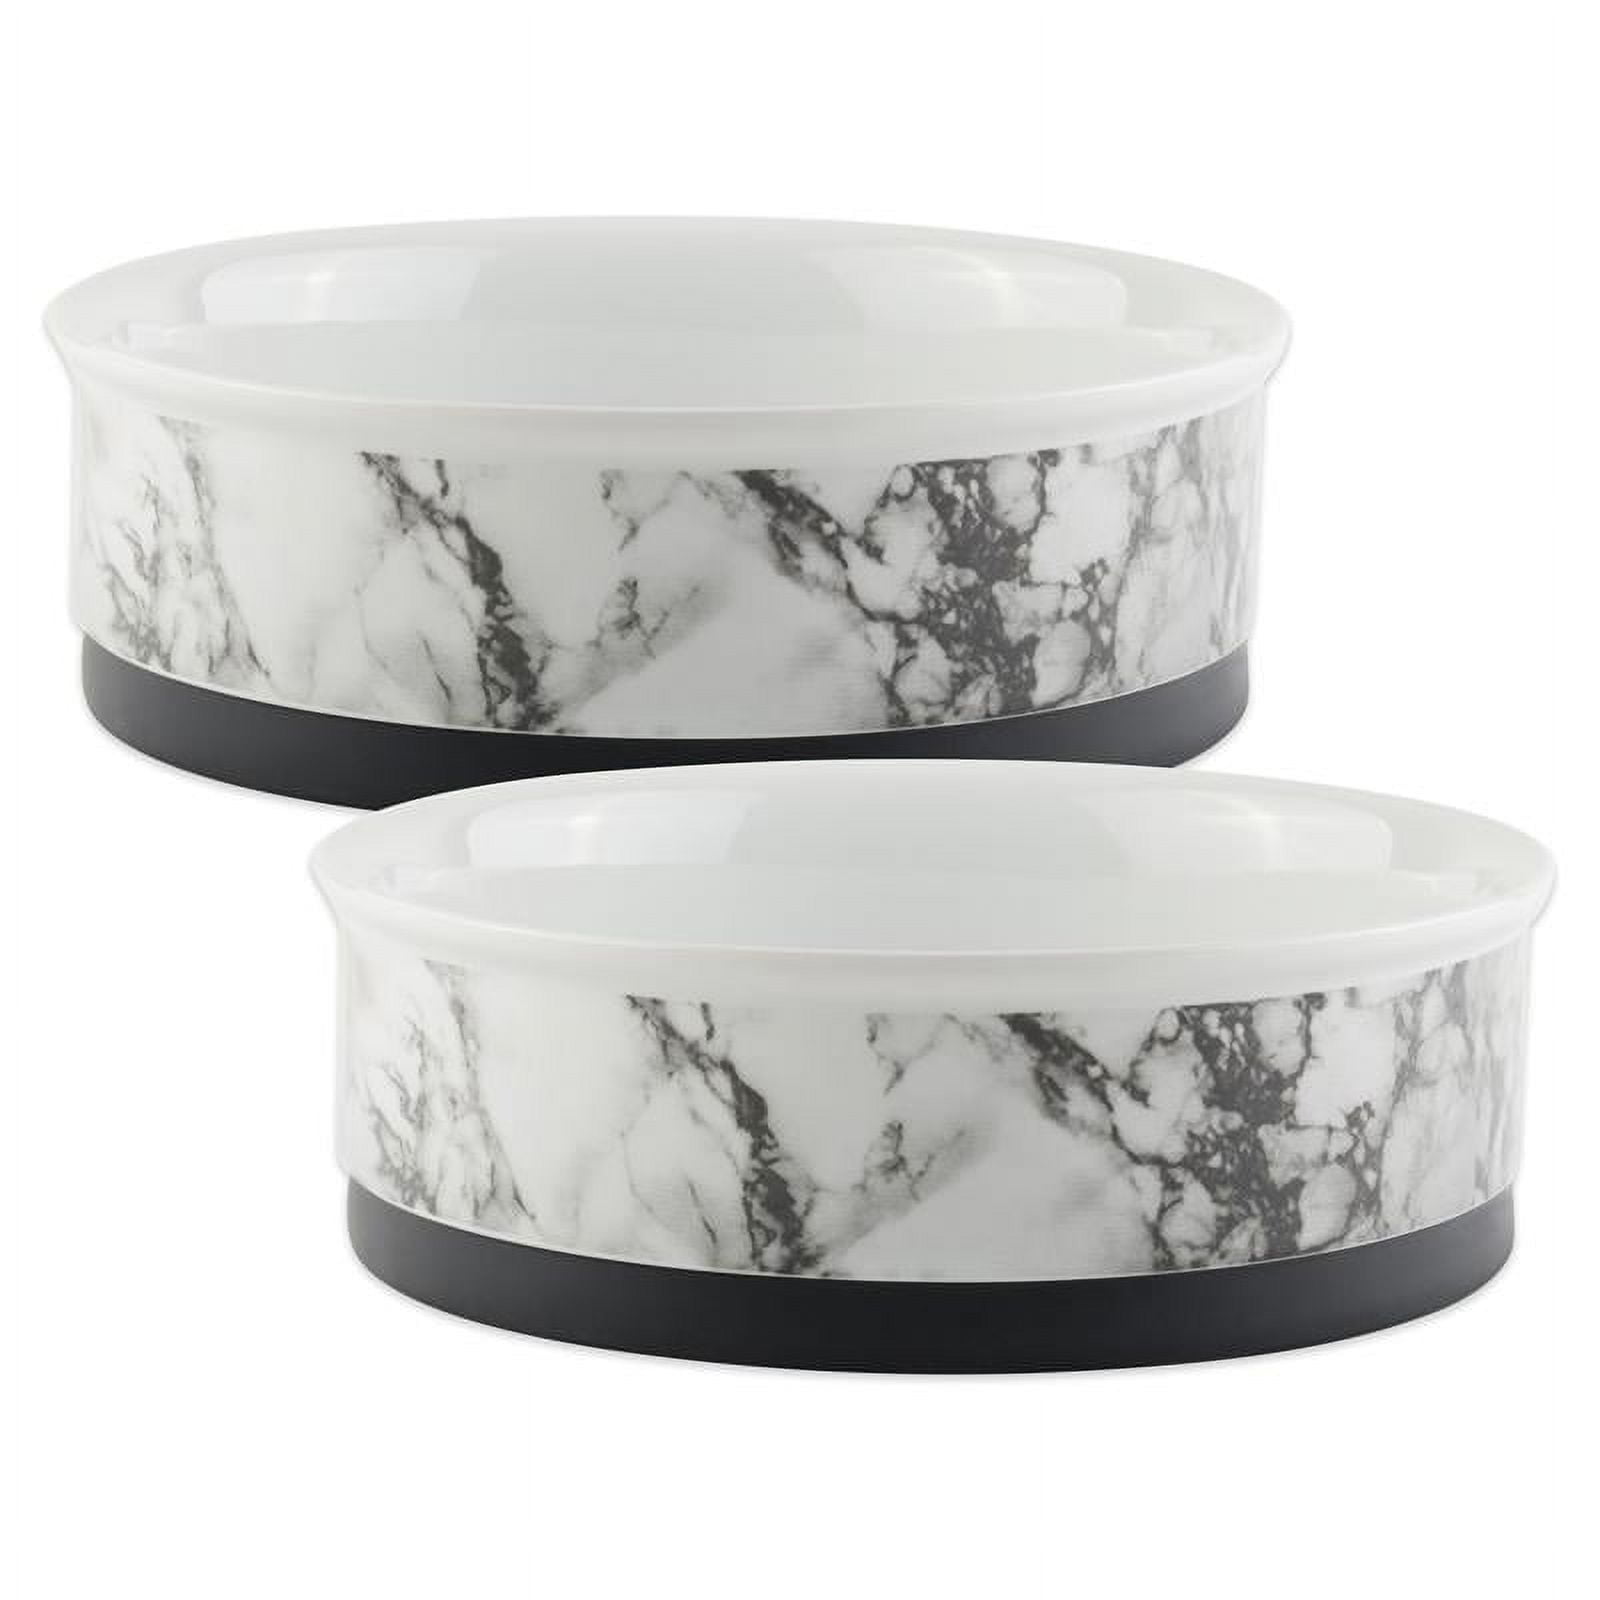 Picture of Design Imports CAMZ10396 4.25 x 2 in. White & Marble Pet Bowl - Small - Set of 2